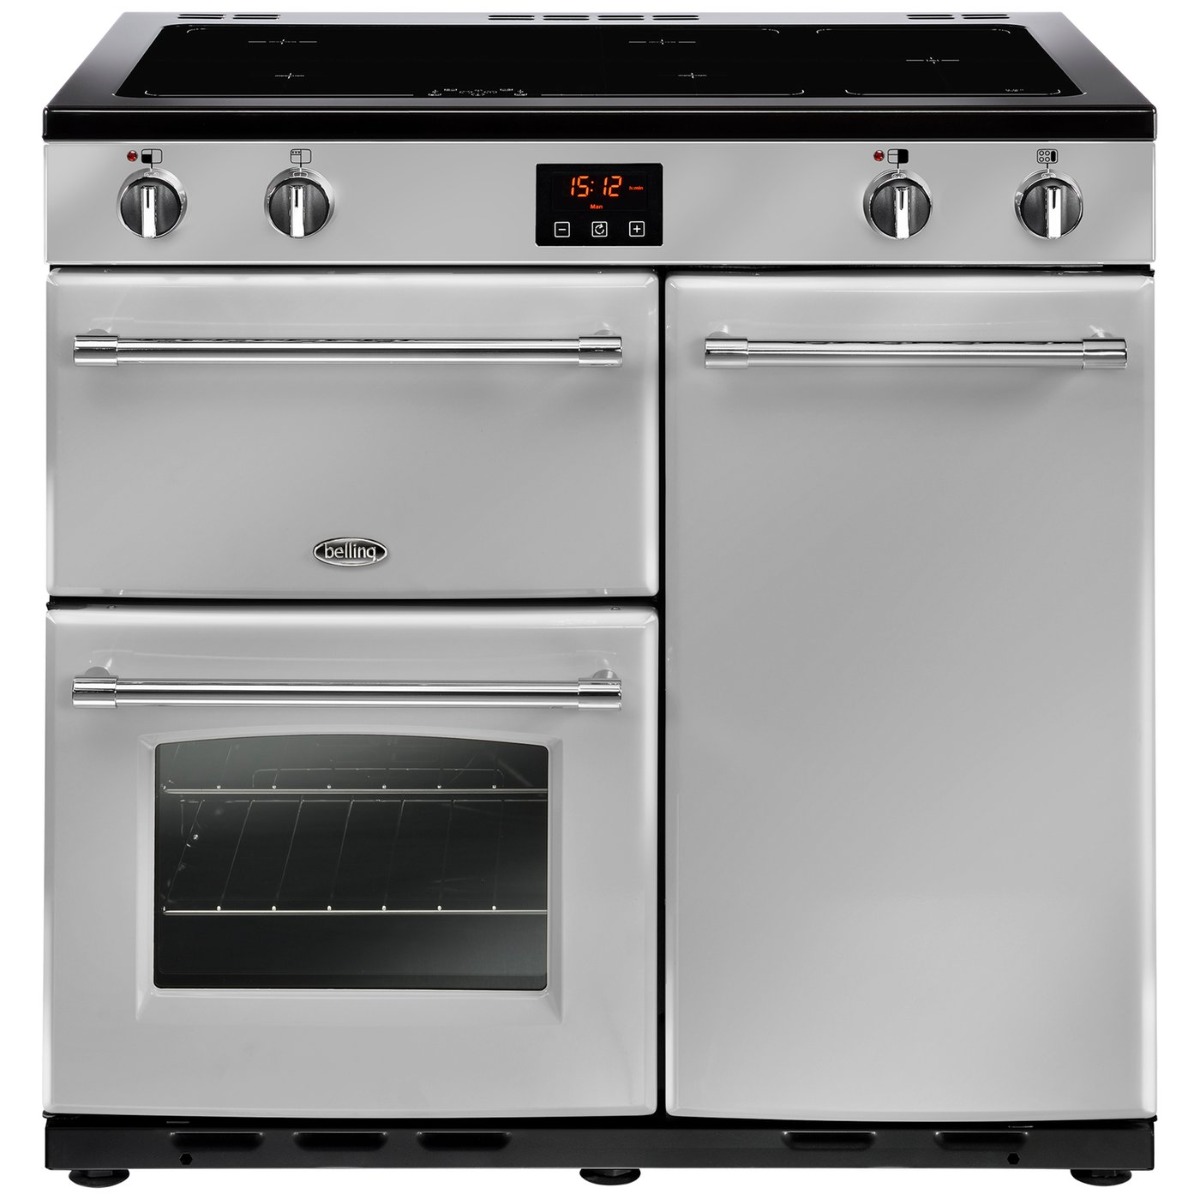 Belling FH90EISIL 90cm Electric Induction Range Cooker - Silver